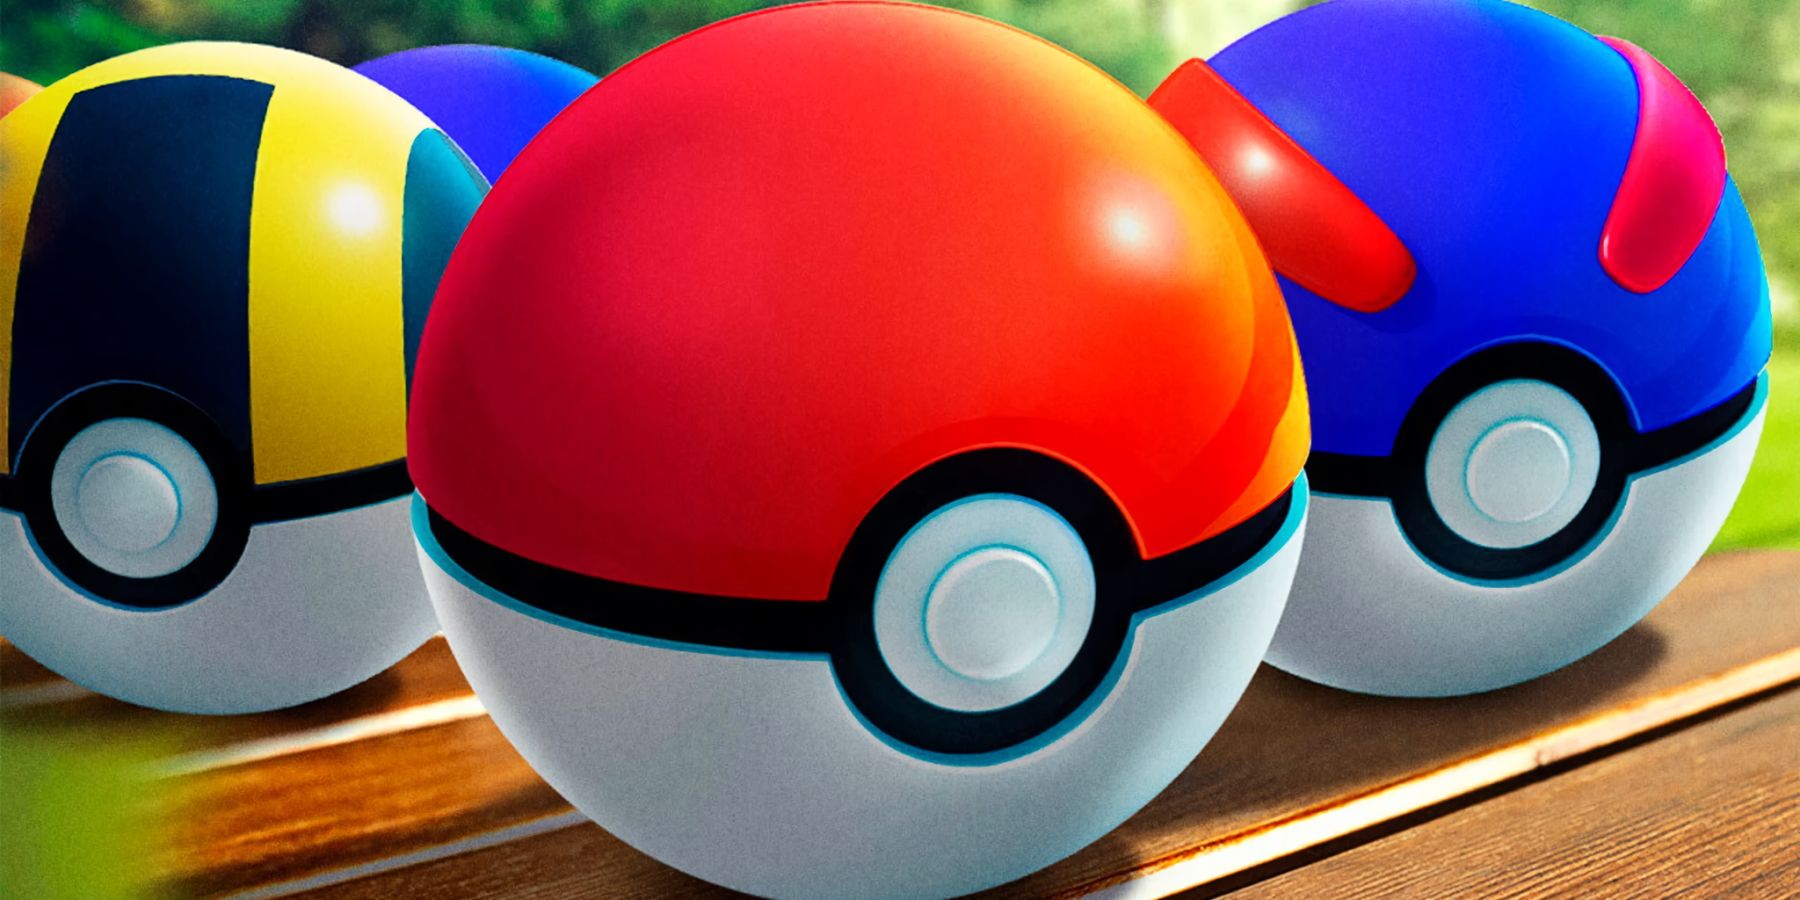 A promotional visual from Pokemon GO showing a Poke Ball, Great Ball, and Ultra Ball.